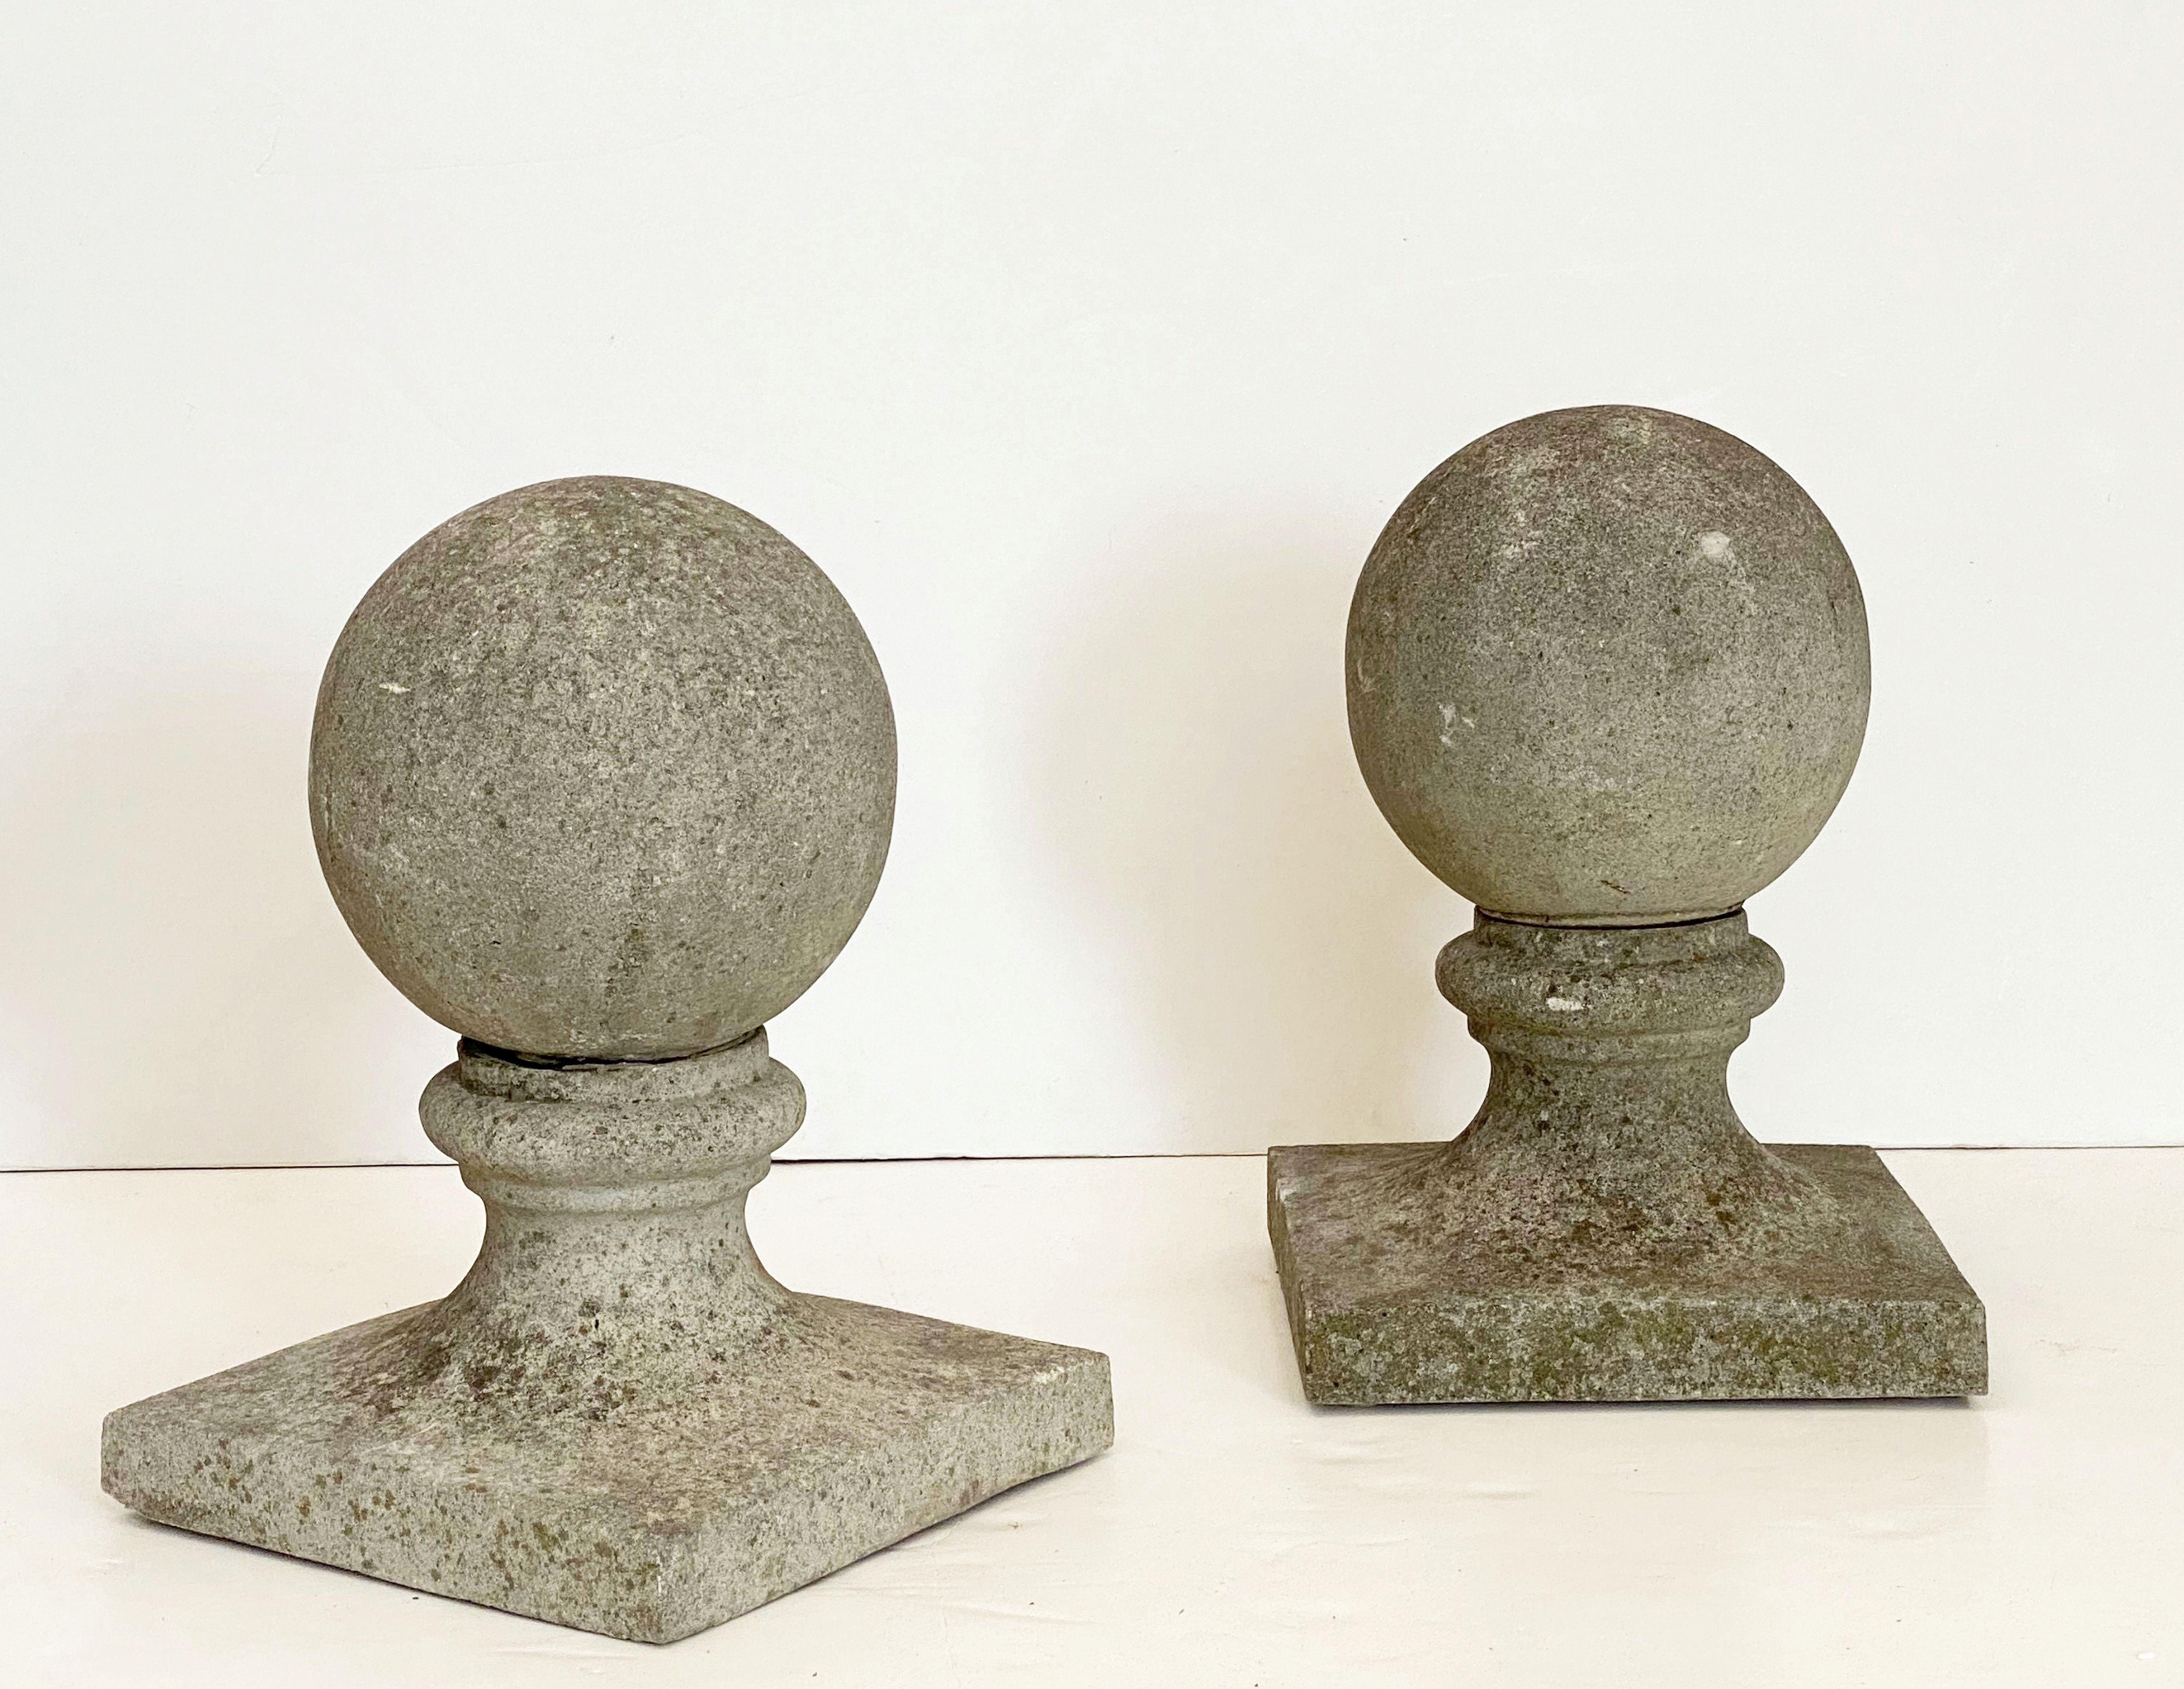 A fine pair of English coping balls of composition stone, each ball set upon a square plinth base.

Dimensions are H 21 1/2 inches x D 14 1/2 inches

Perfect for use as an indoor or outdoor garden, garden room, or patio feature!

Individually